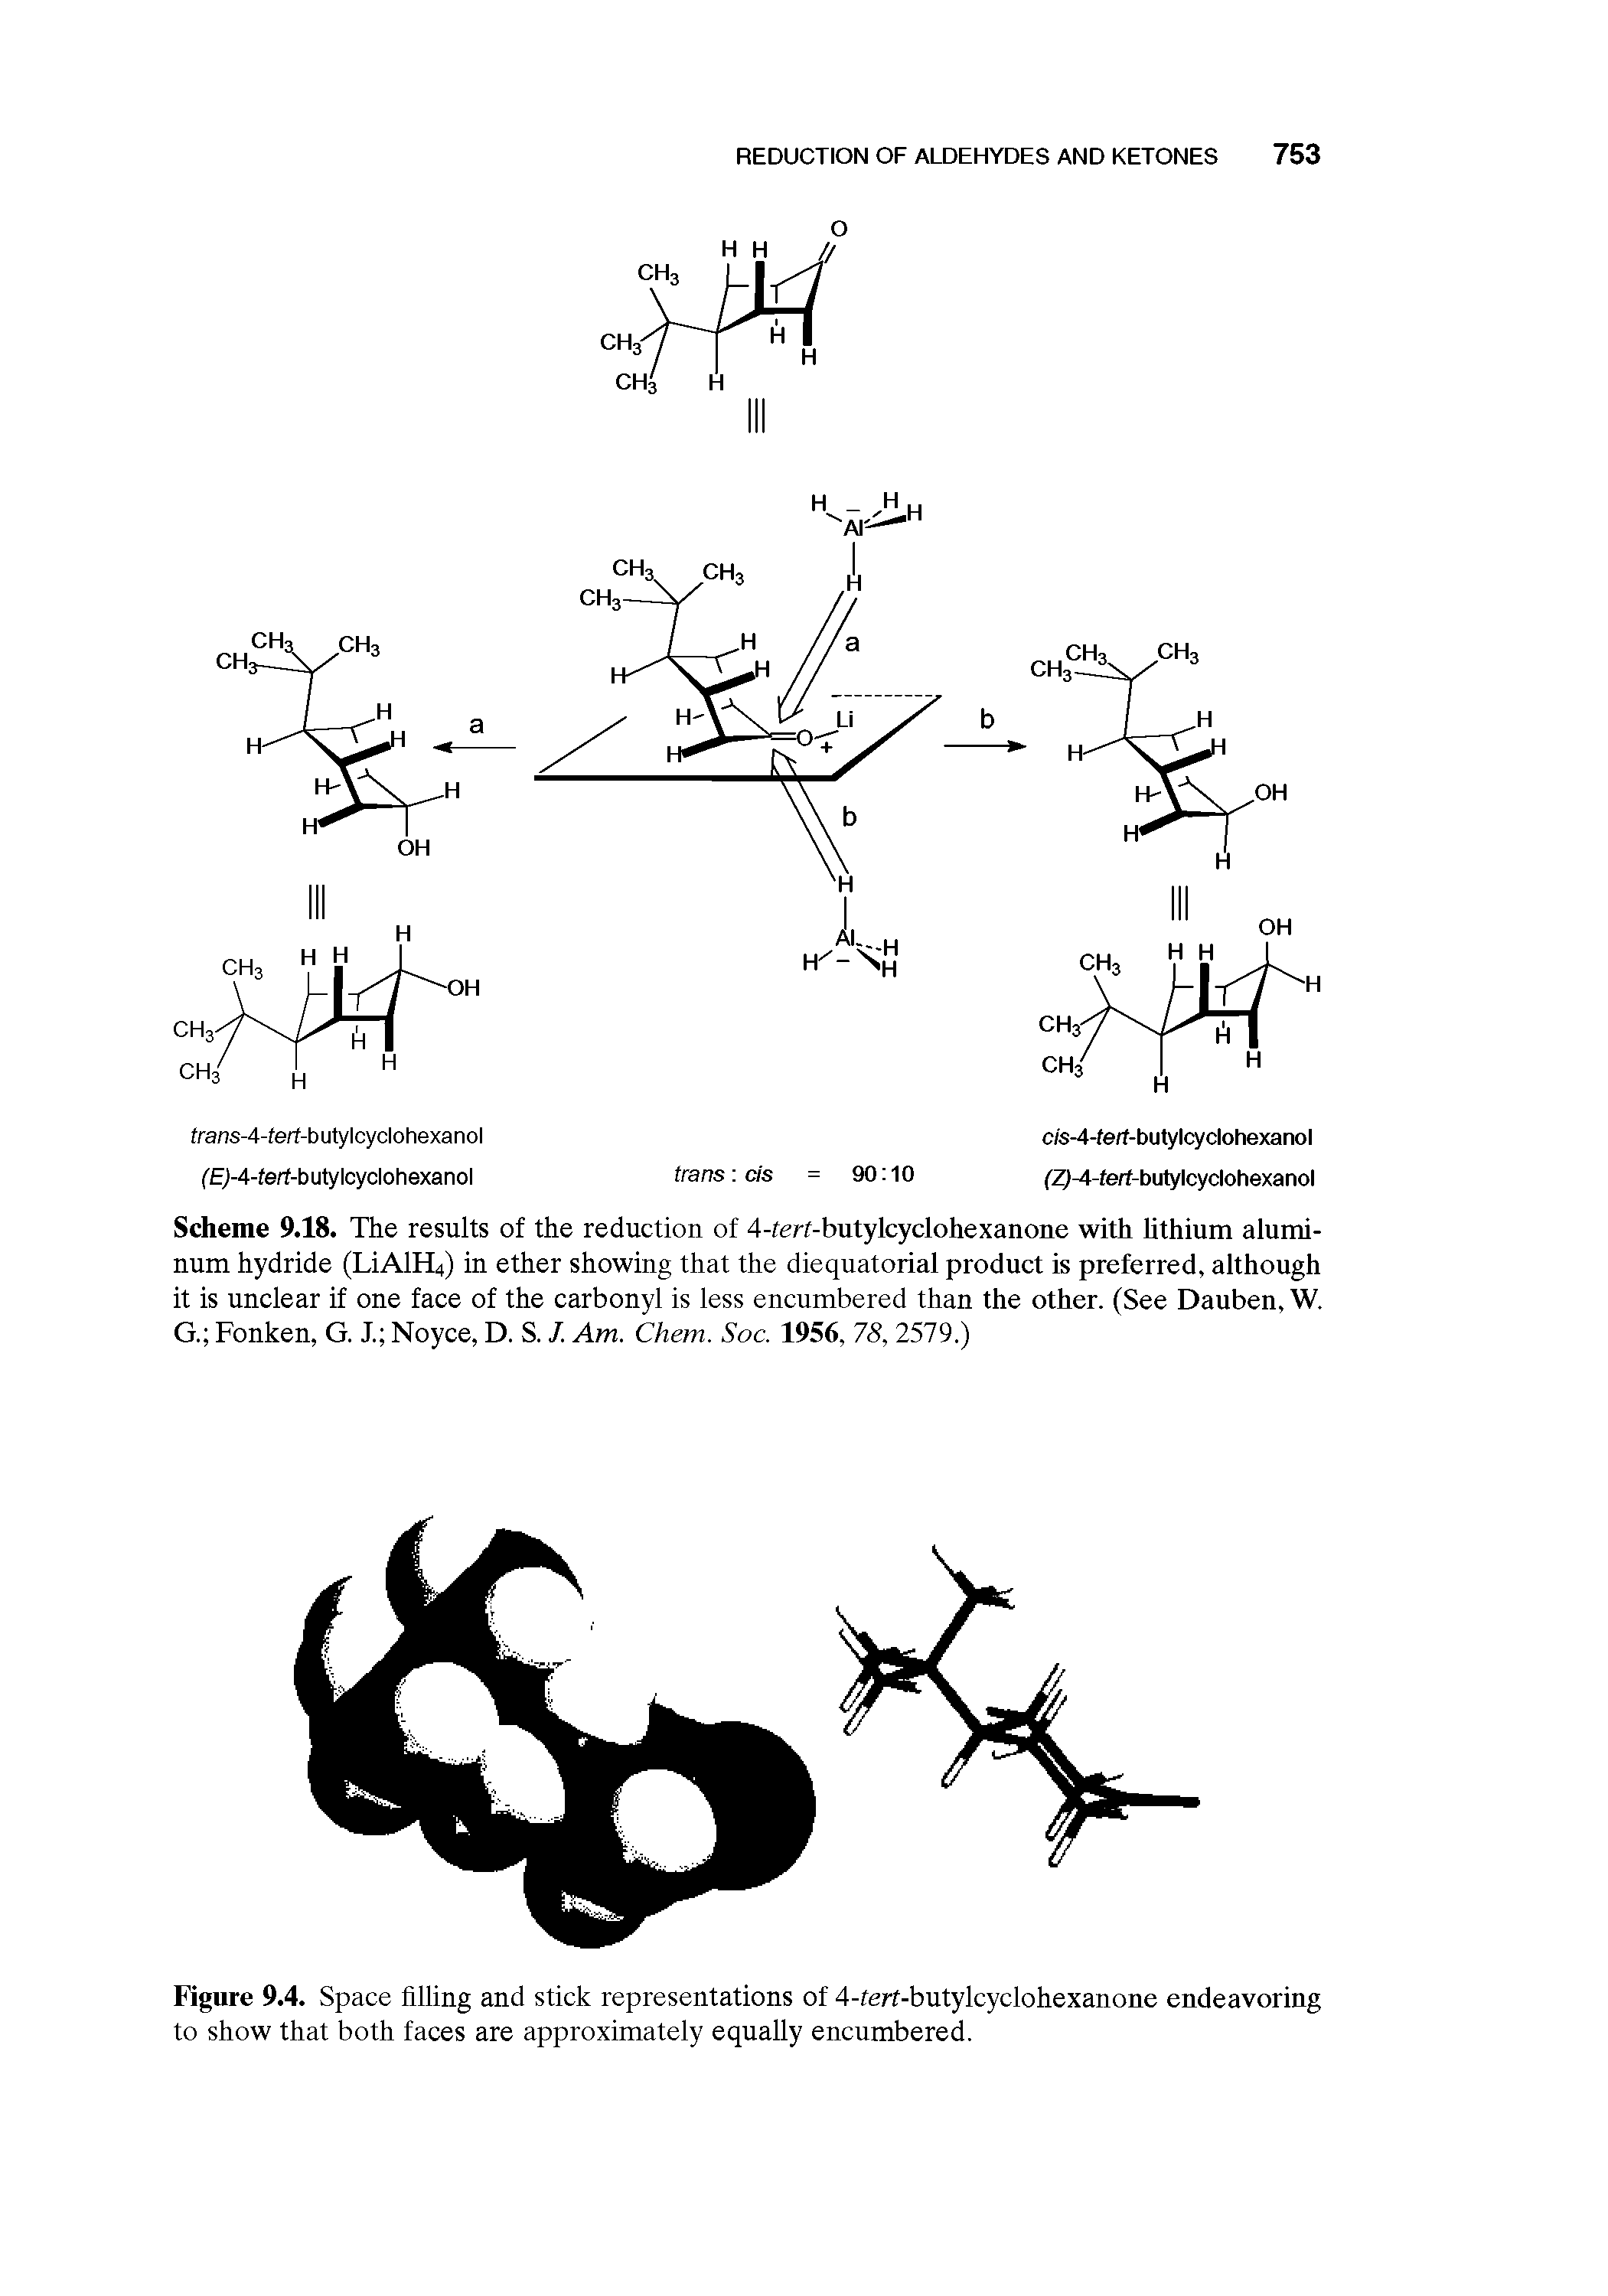 Scheme 9.18. The results of the reduction of 4-ferf-butylcyclohexanone with lithium aluminum hydride (LiAlH4) in ether showing that the diequatorial product is preferred, although it is unclear if one face of the carbonyl is less encumbered than the other. (See Dauben, W. G. Fonken, G. I Noyce, D. S. J. Am. Chem. Soc. 1956, 78, 2579.)...